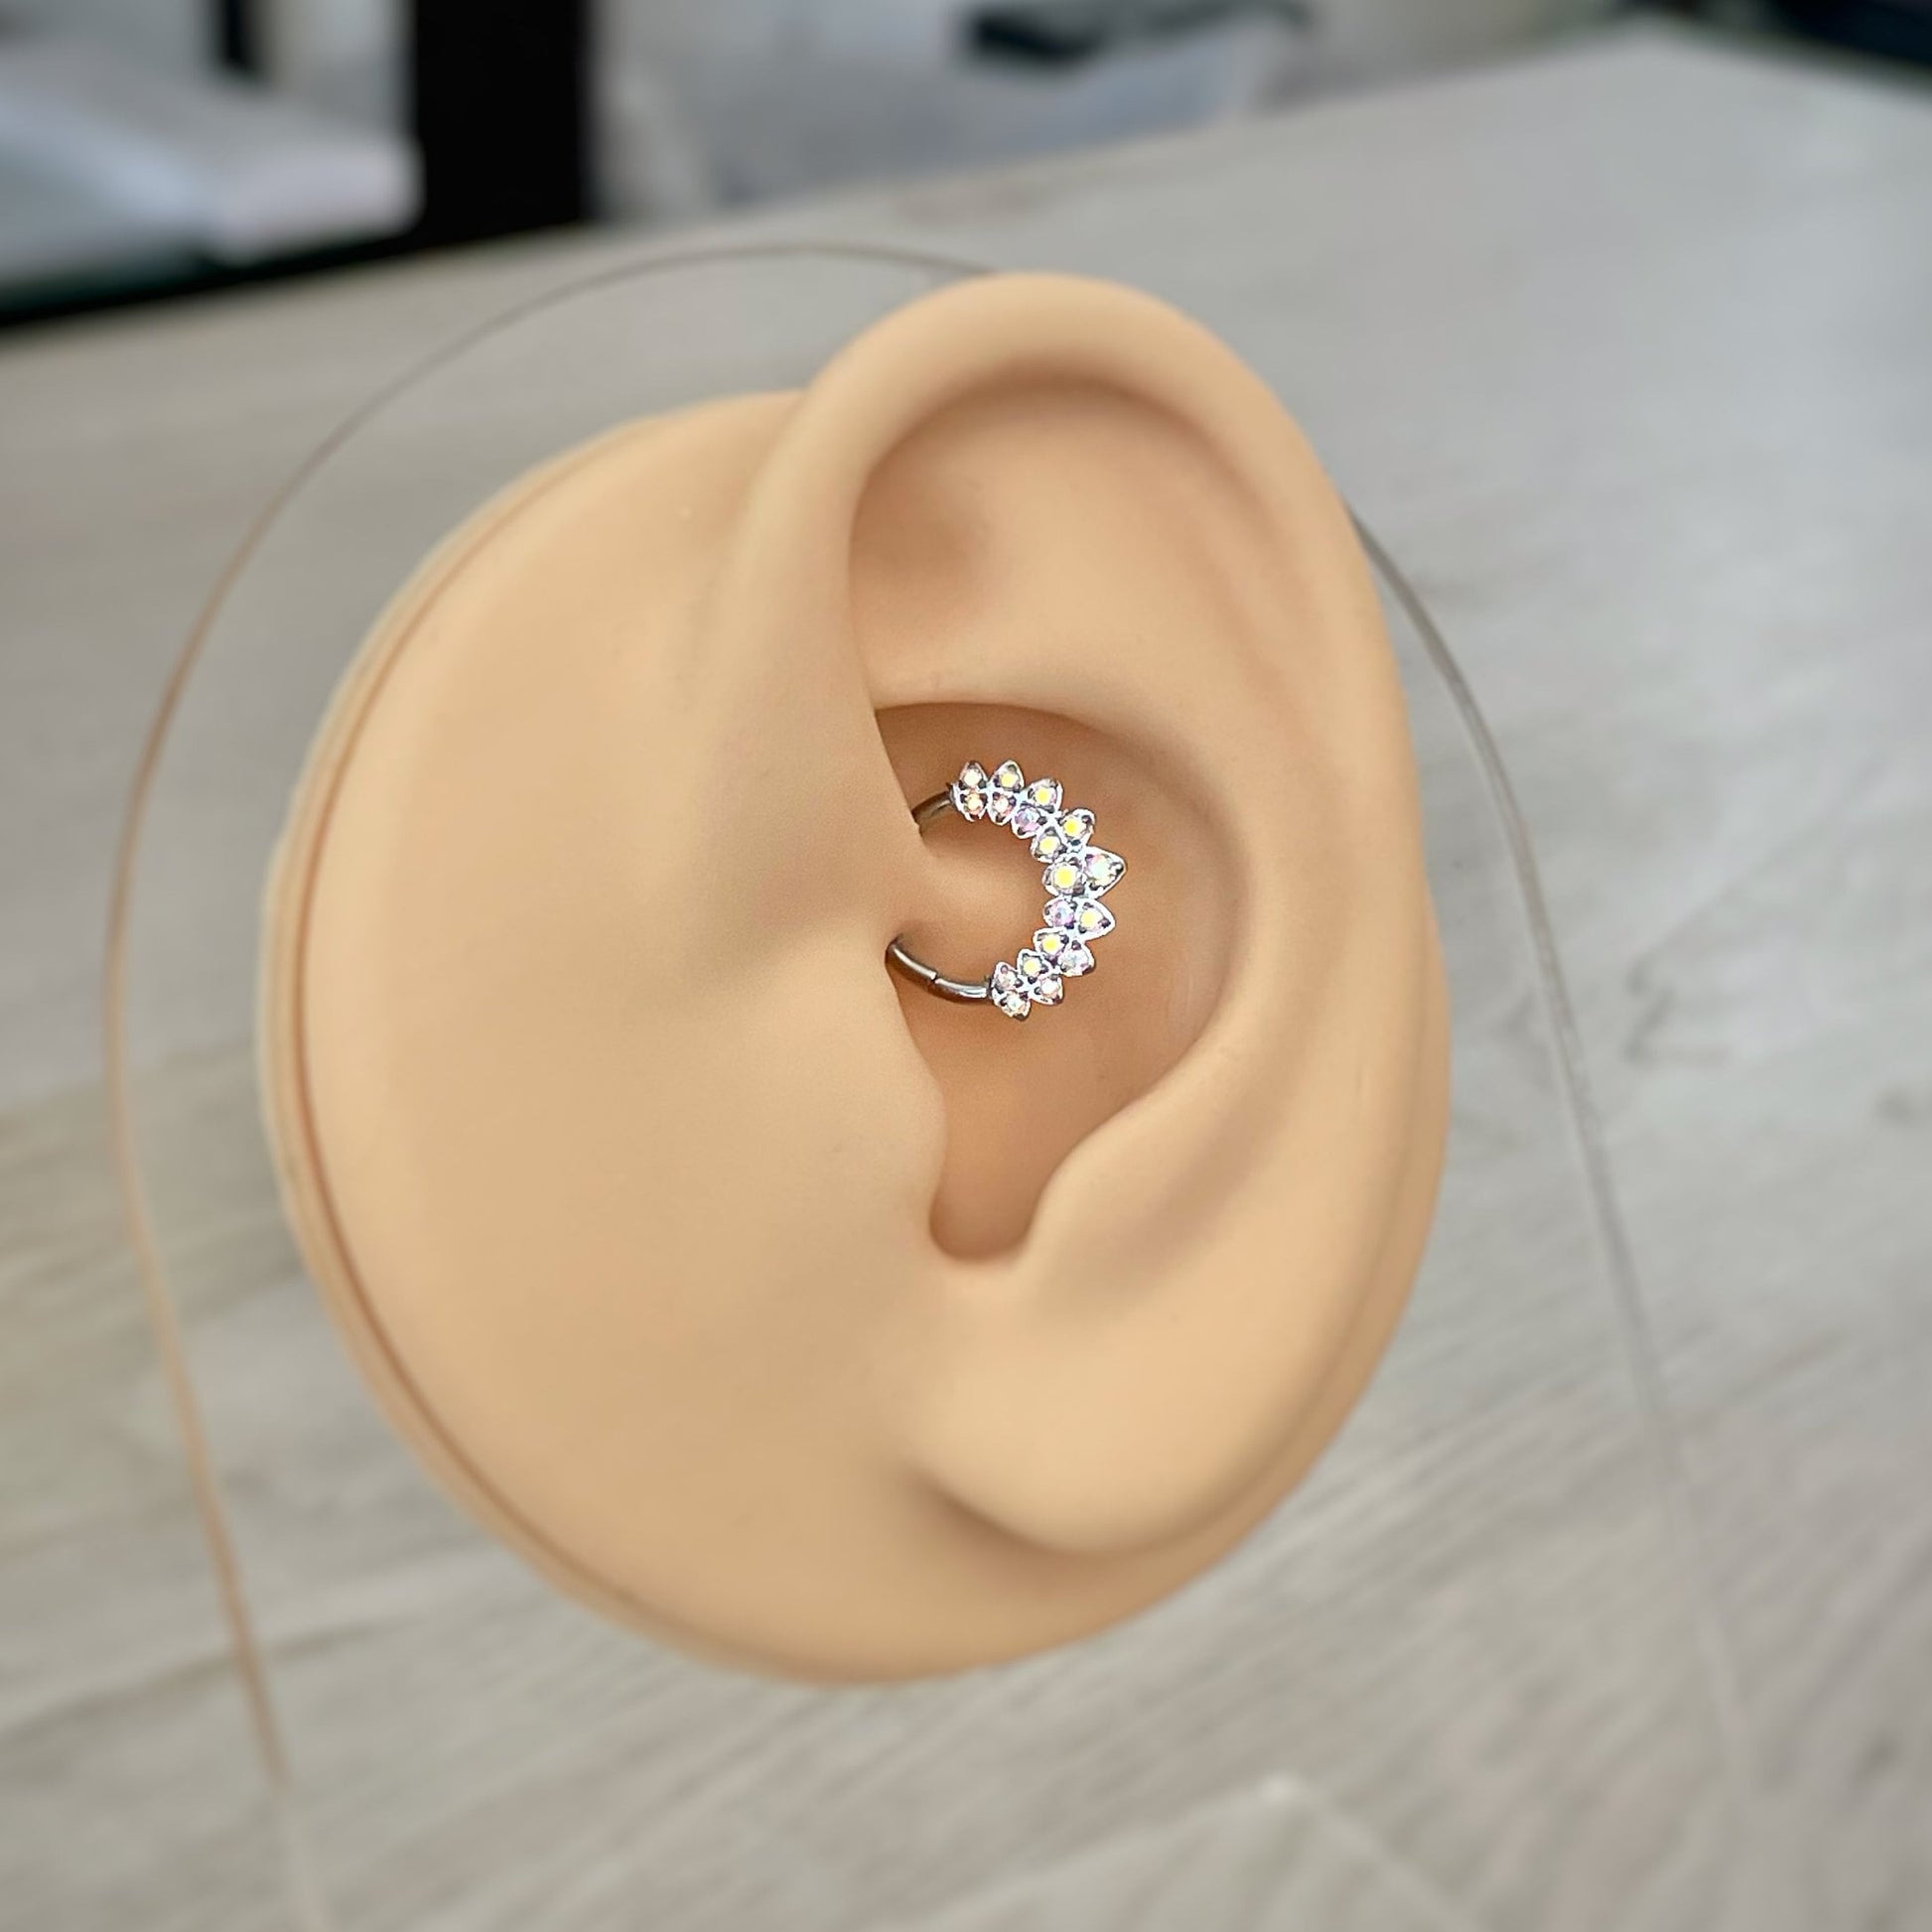 Silver Daith Earring (16G | 8mm or 10mm | Surgical Steel | Gold with Clear CZ, Silver with Aurora/Color-Shifting CZ, Silver with Clear CZ, or Silver with Rainbow CZ)